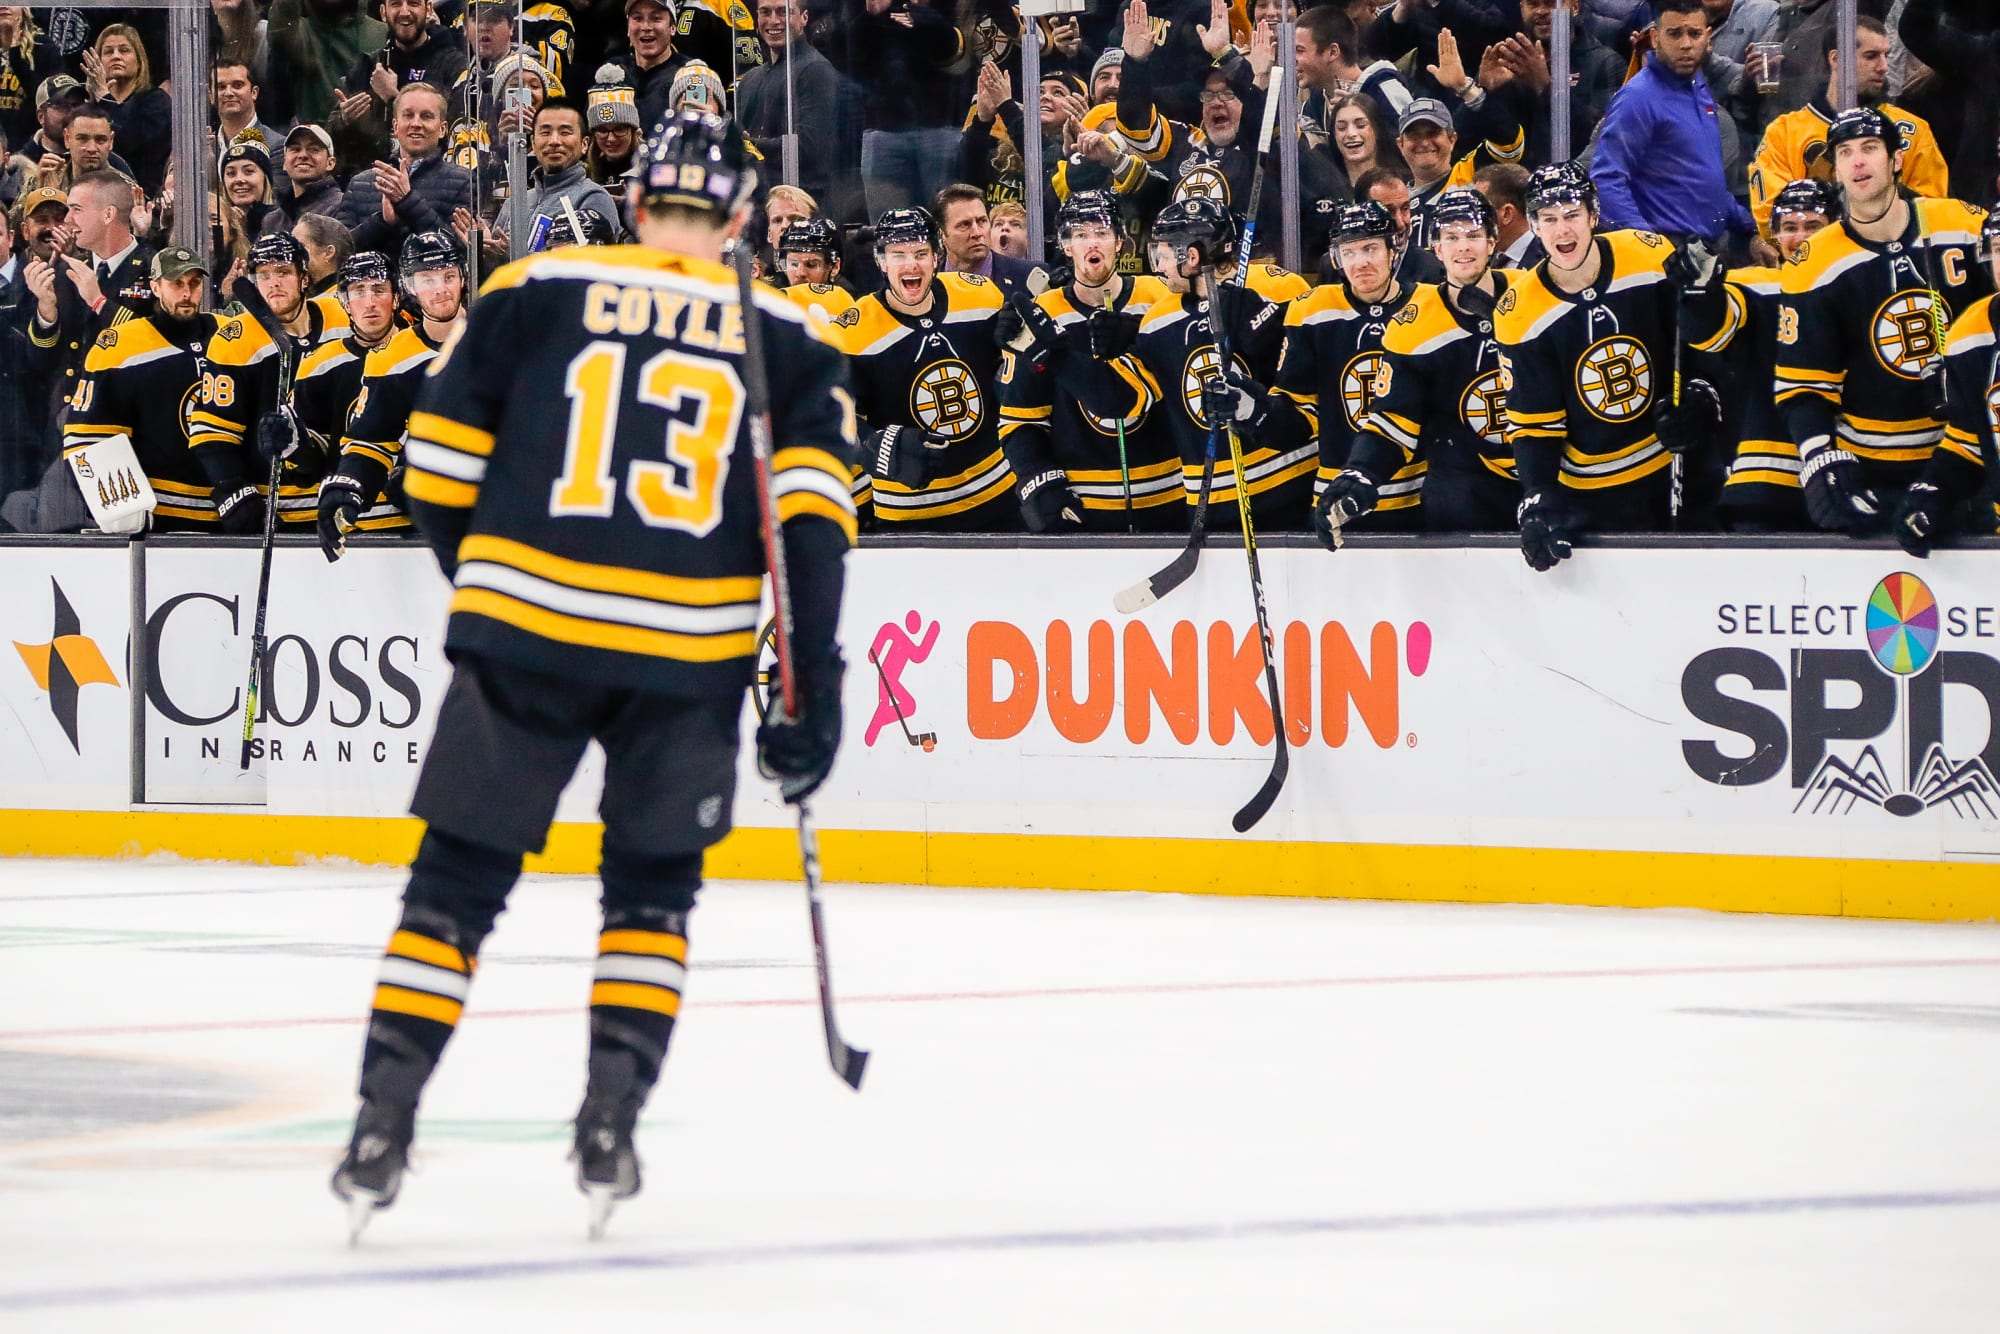 Charlie Coyle's defensive game has turned him into Bruins' unsung hero